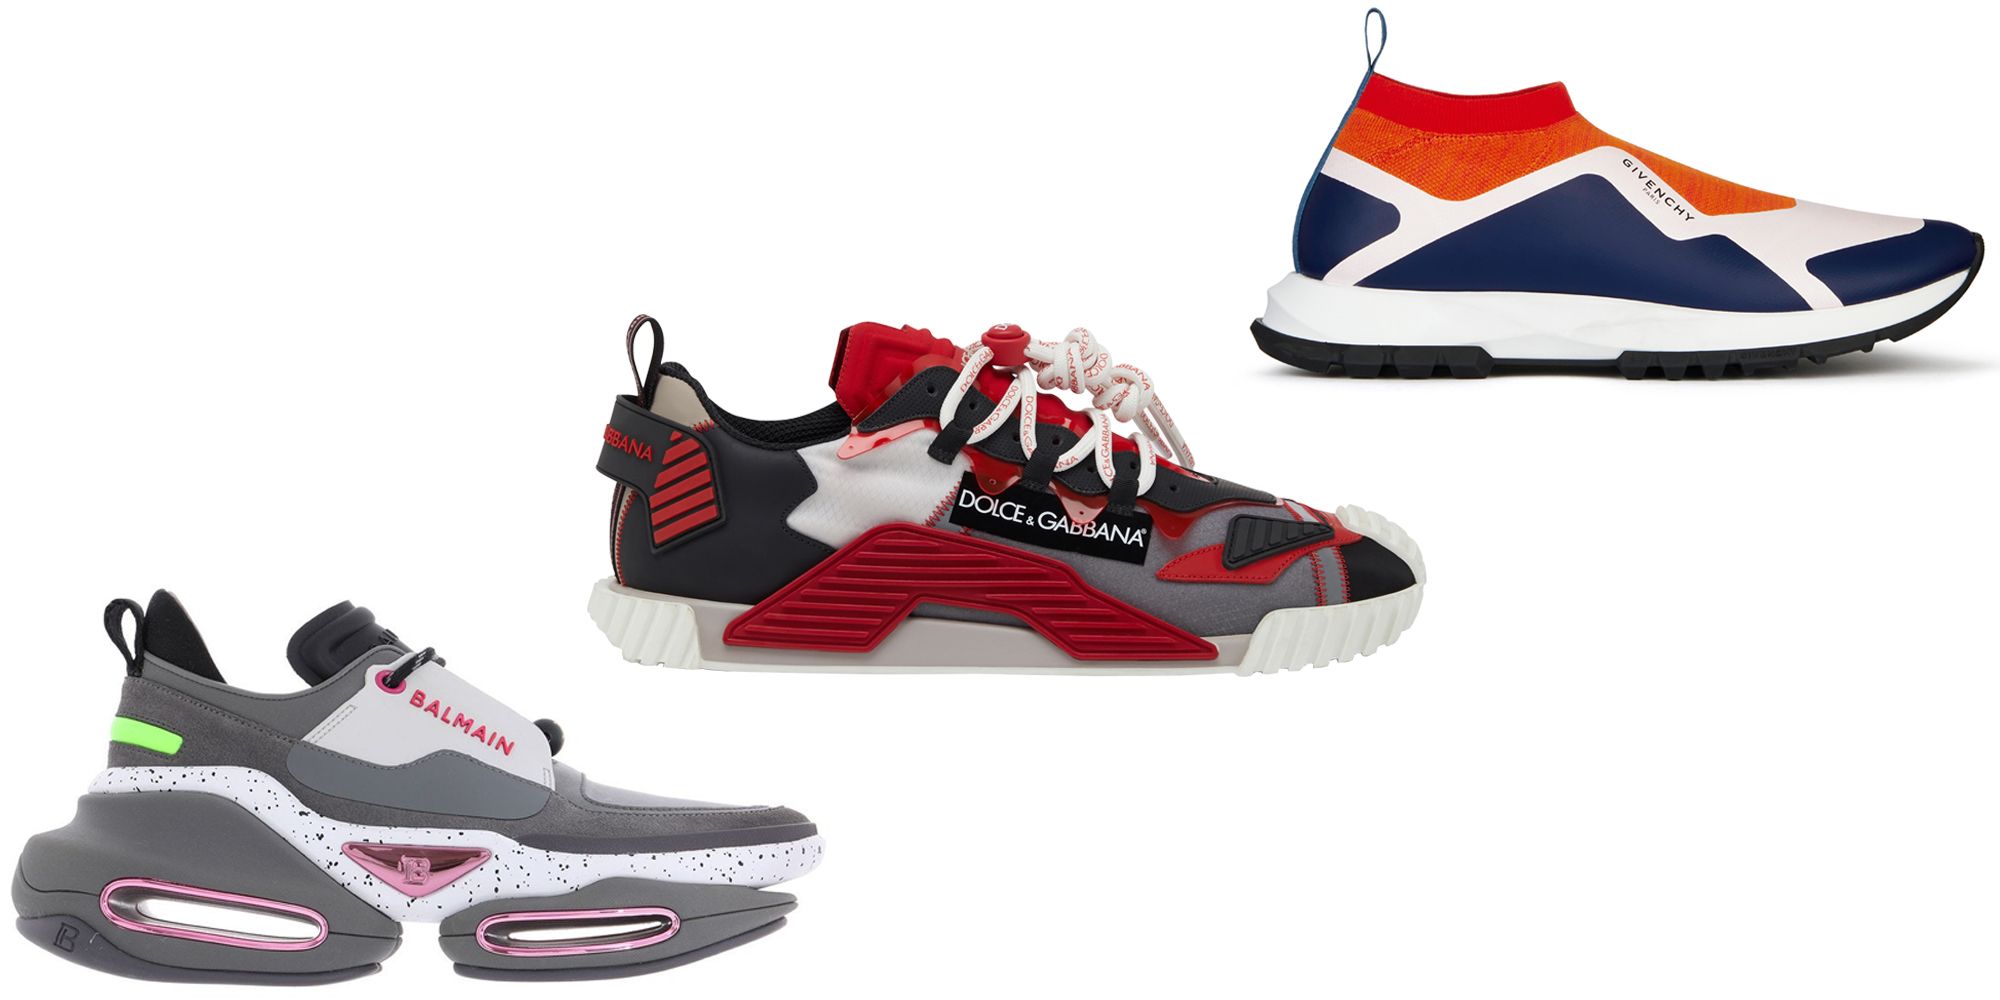 Luxury Brands Are Running Fast With the Sneaker Trend – WWD